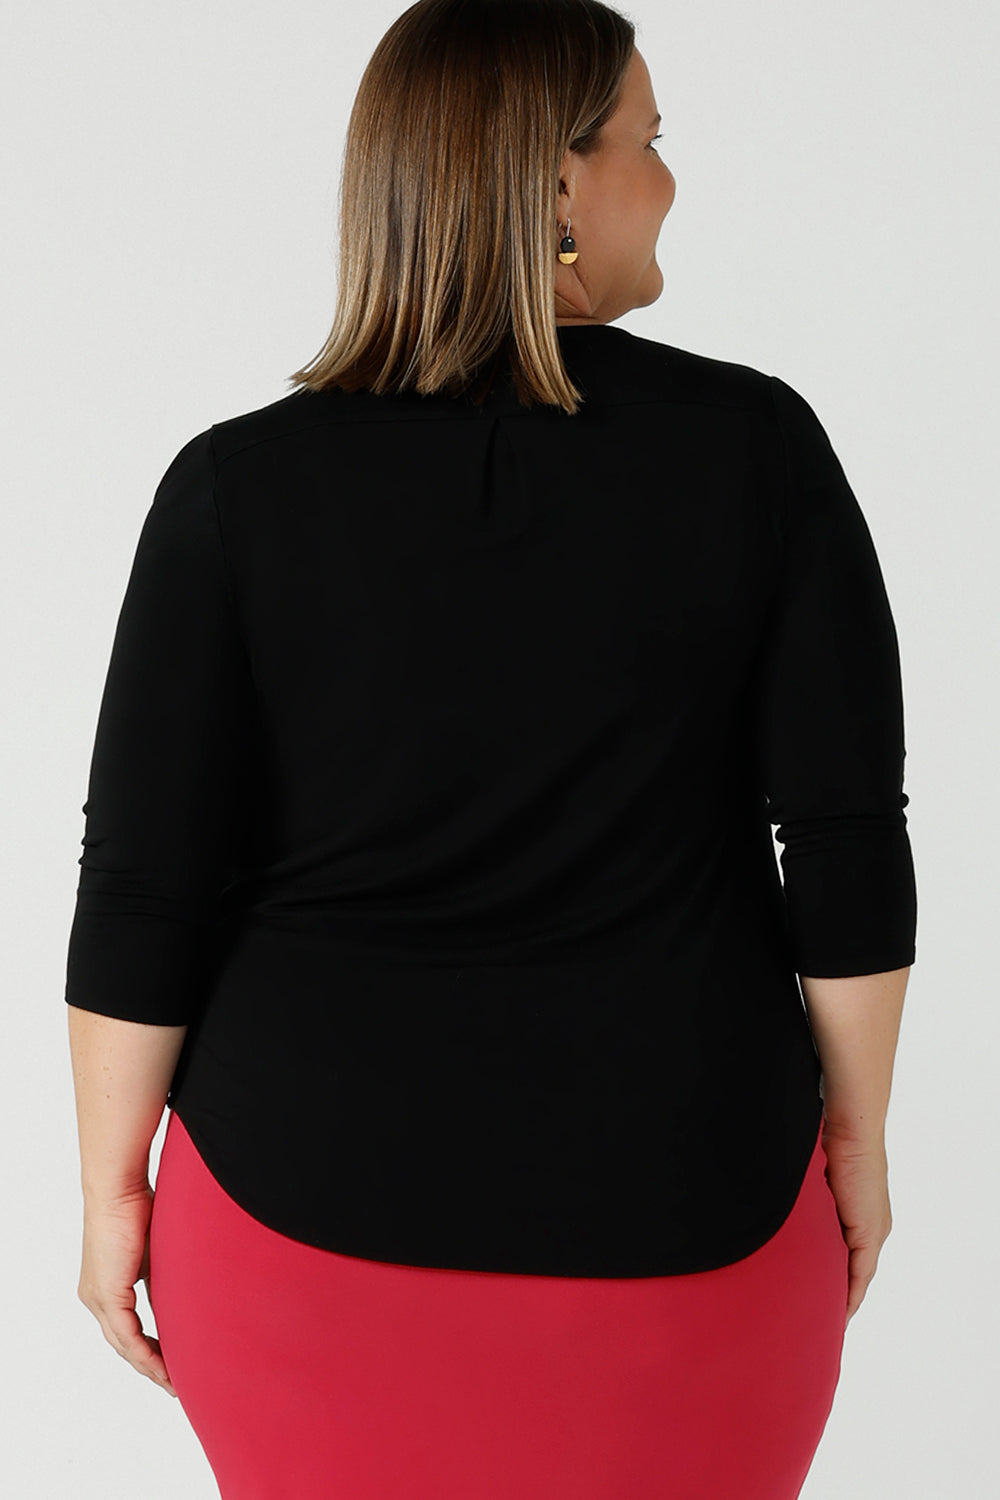 Jules in black bamboo with a scoop neckline and 3/4 sleeve.  In soft black bamboo, this top is the perfect corporate casual workwear top. Designed and made in Australia for Leina & Fleur sizes 8 - 24. Styled on a curvy size 18 model. 